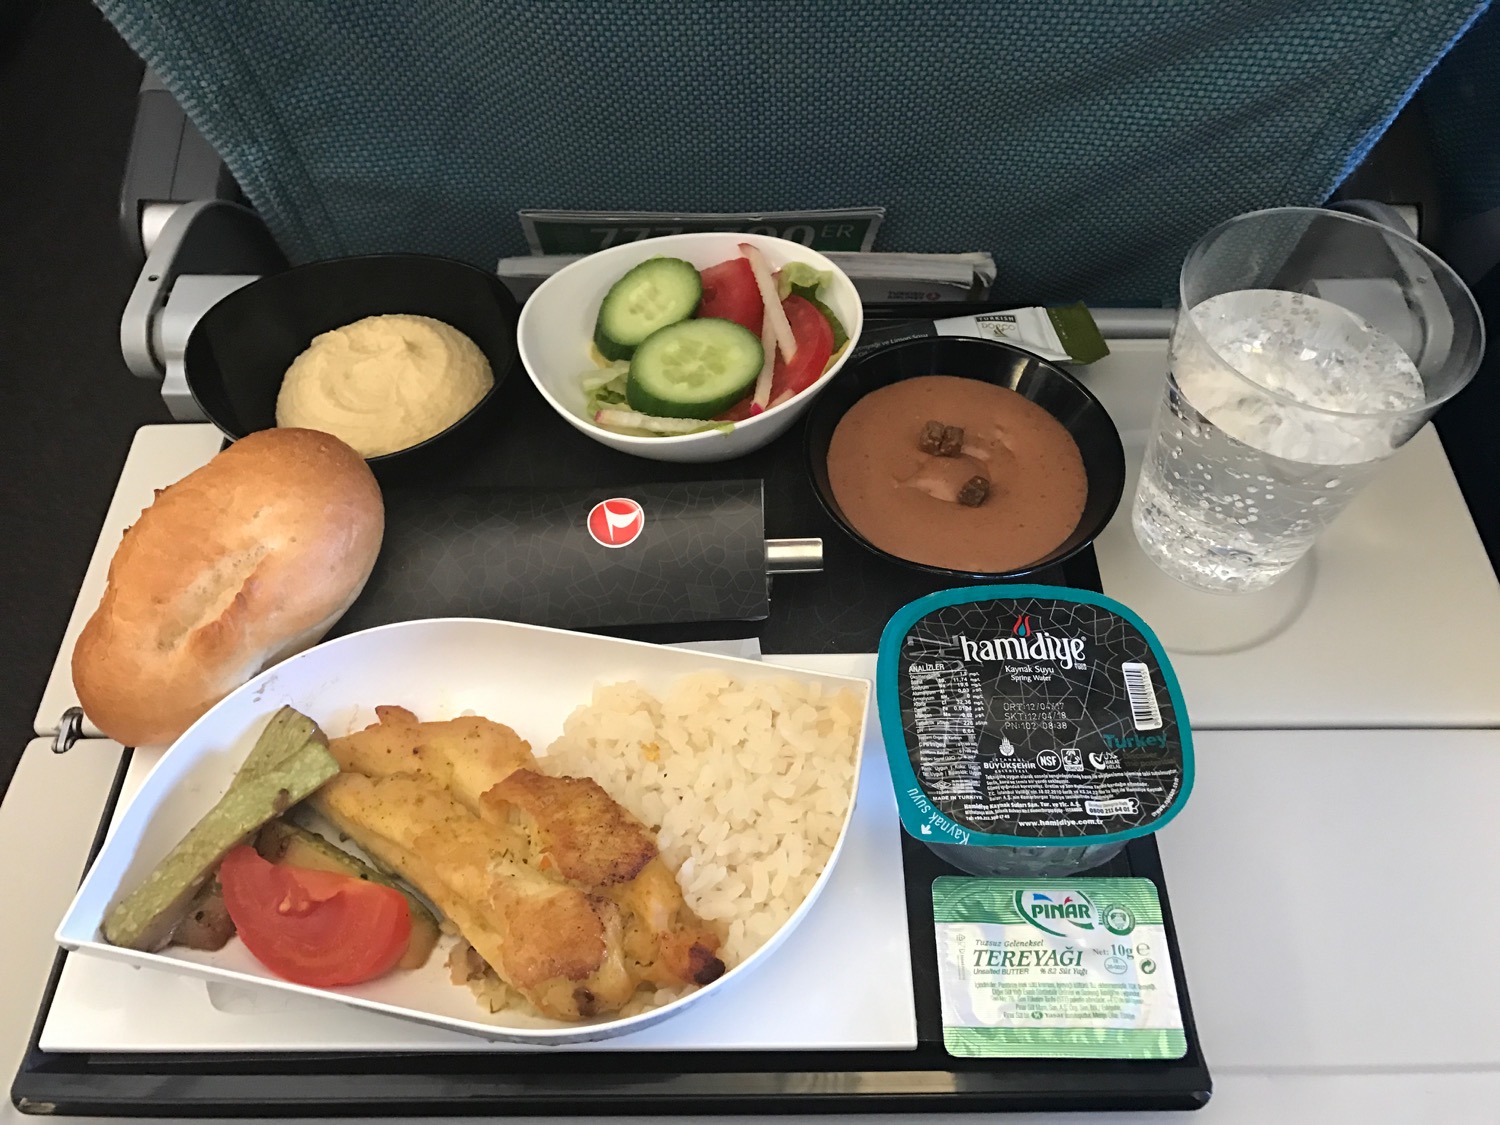 Turkish Airlines Economy Class Meals - 5